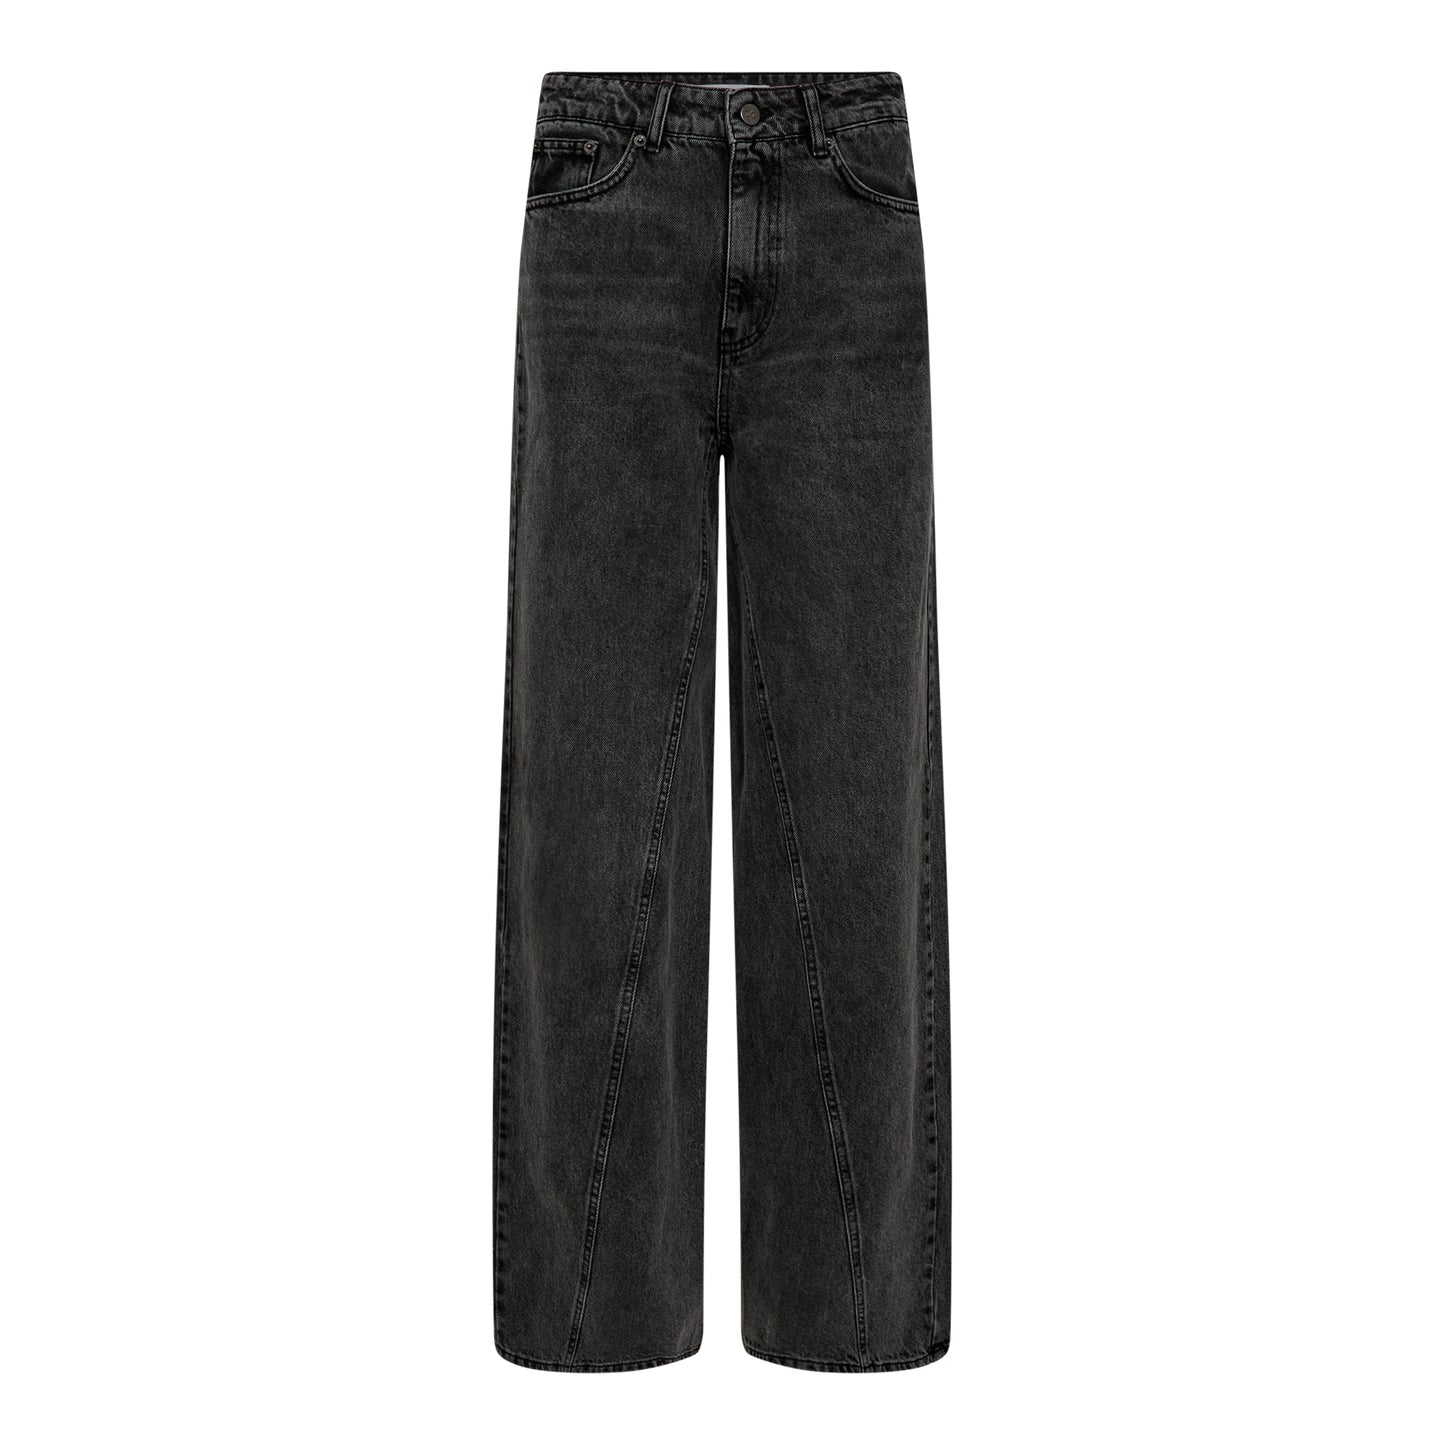 Cocouture - VikaCC Jeans med bred søm - Sort